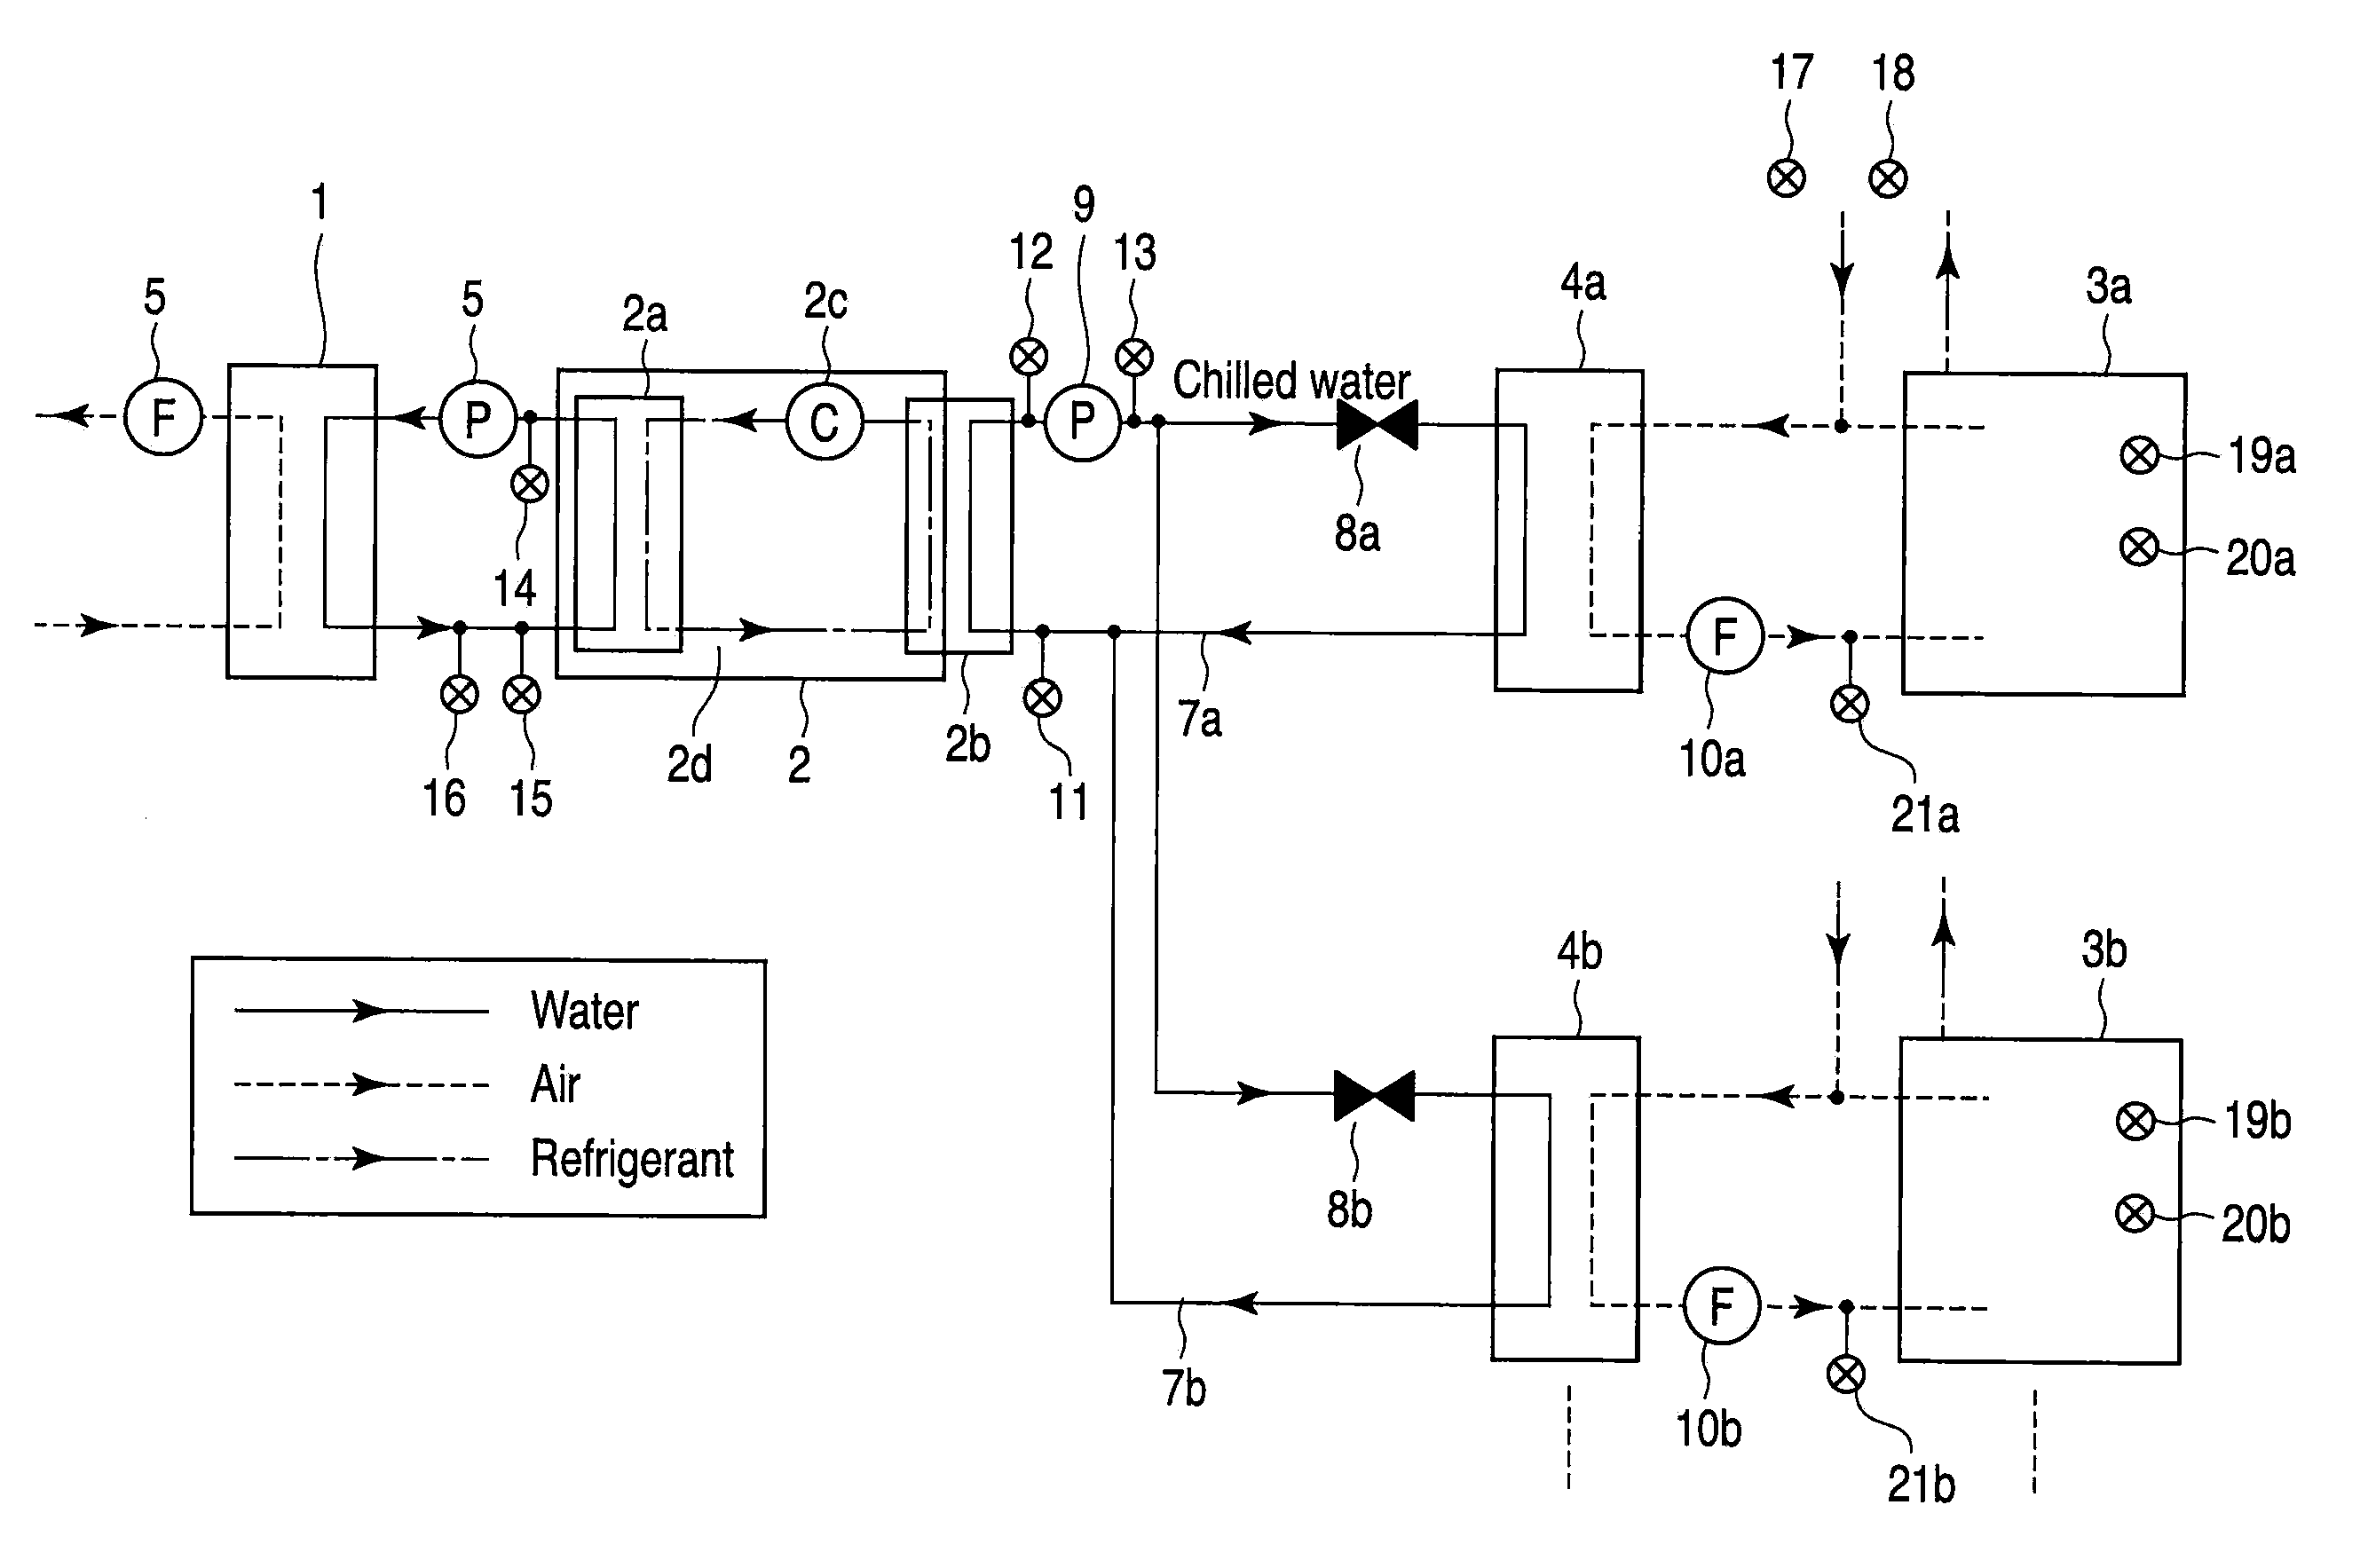 Air-conditioning system controller